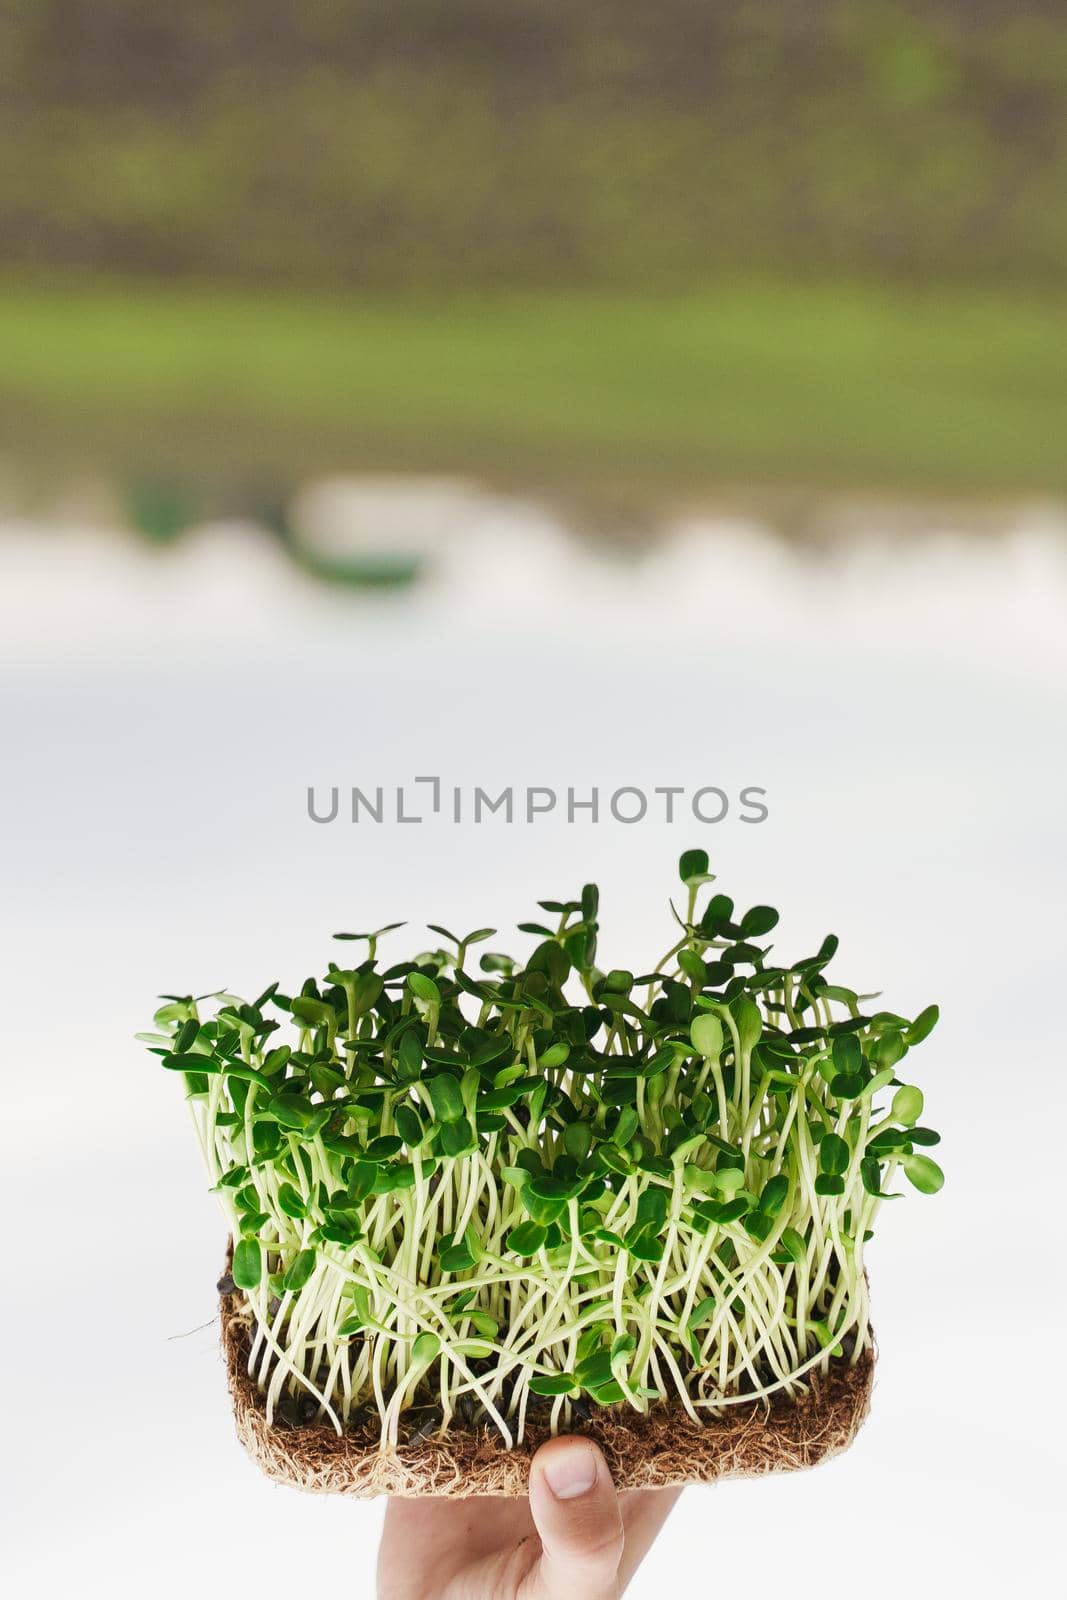 Microgreen of sunflower seeds in hands. creative upside down photo. Idea for healthy vegan green microgreen advert. Vegeterian food delivery service.